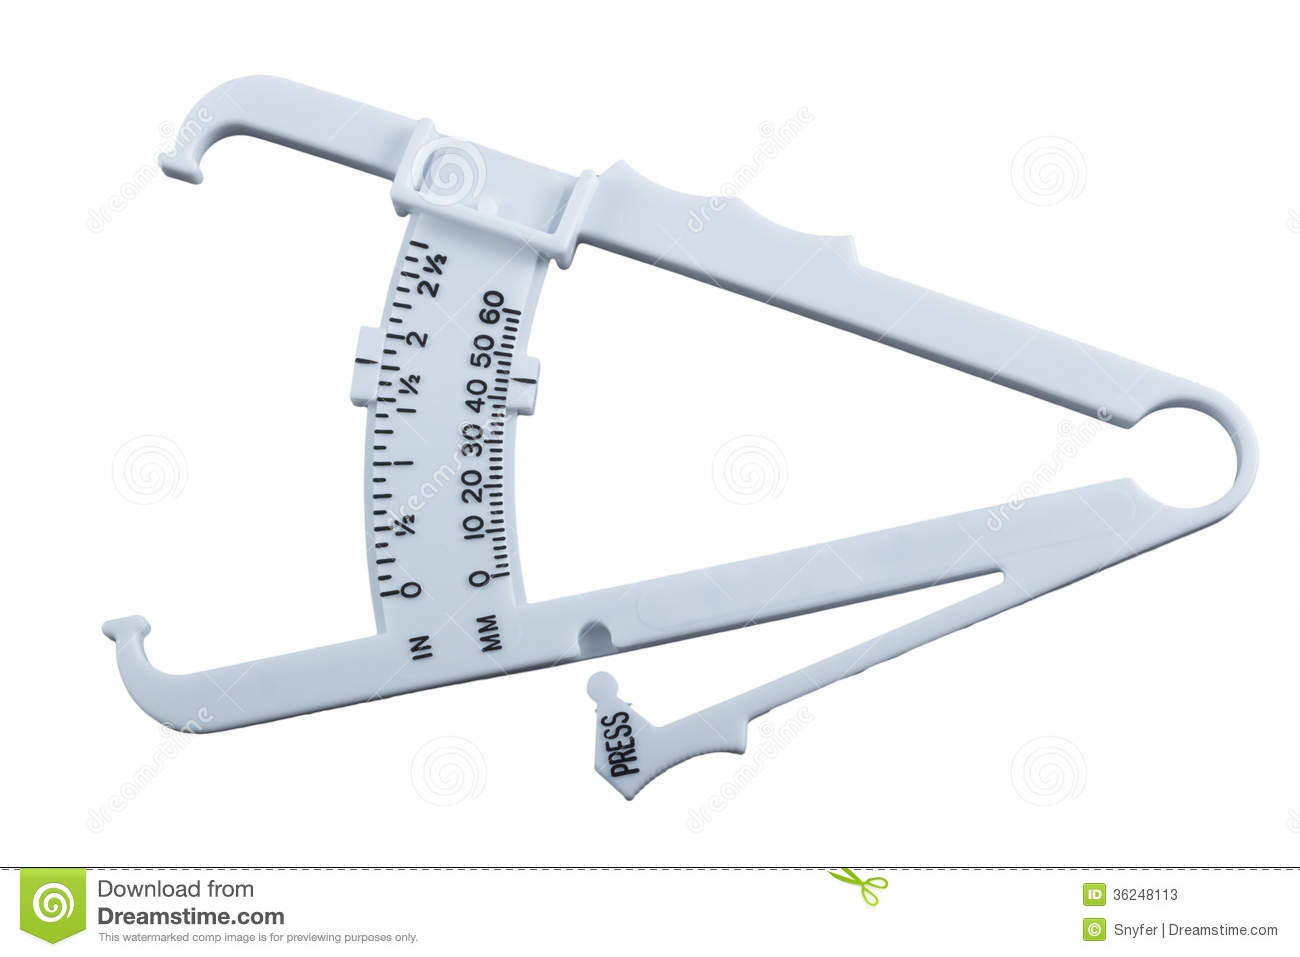 Body Fat Measuring Calipers Isolated On White Background